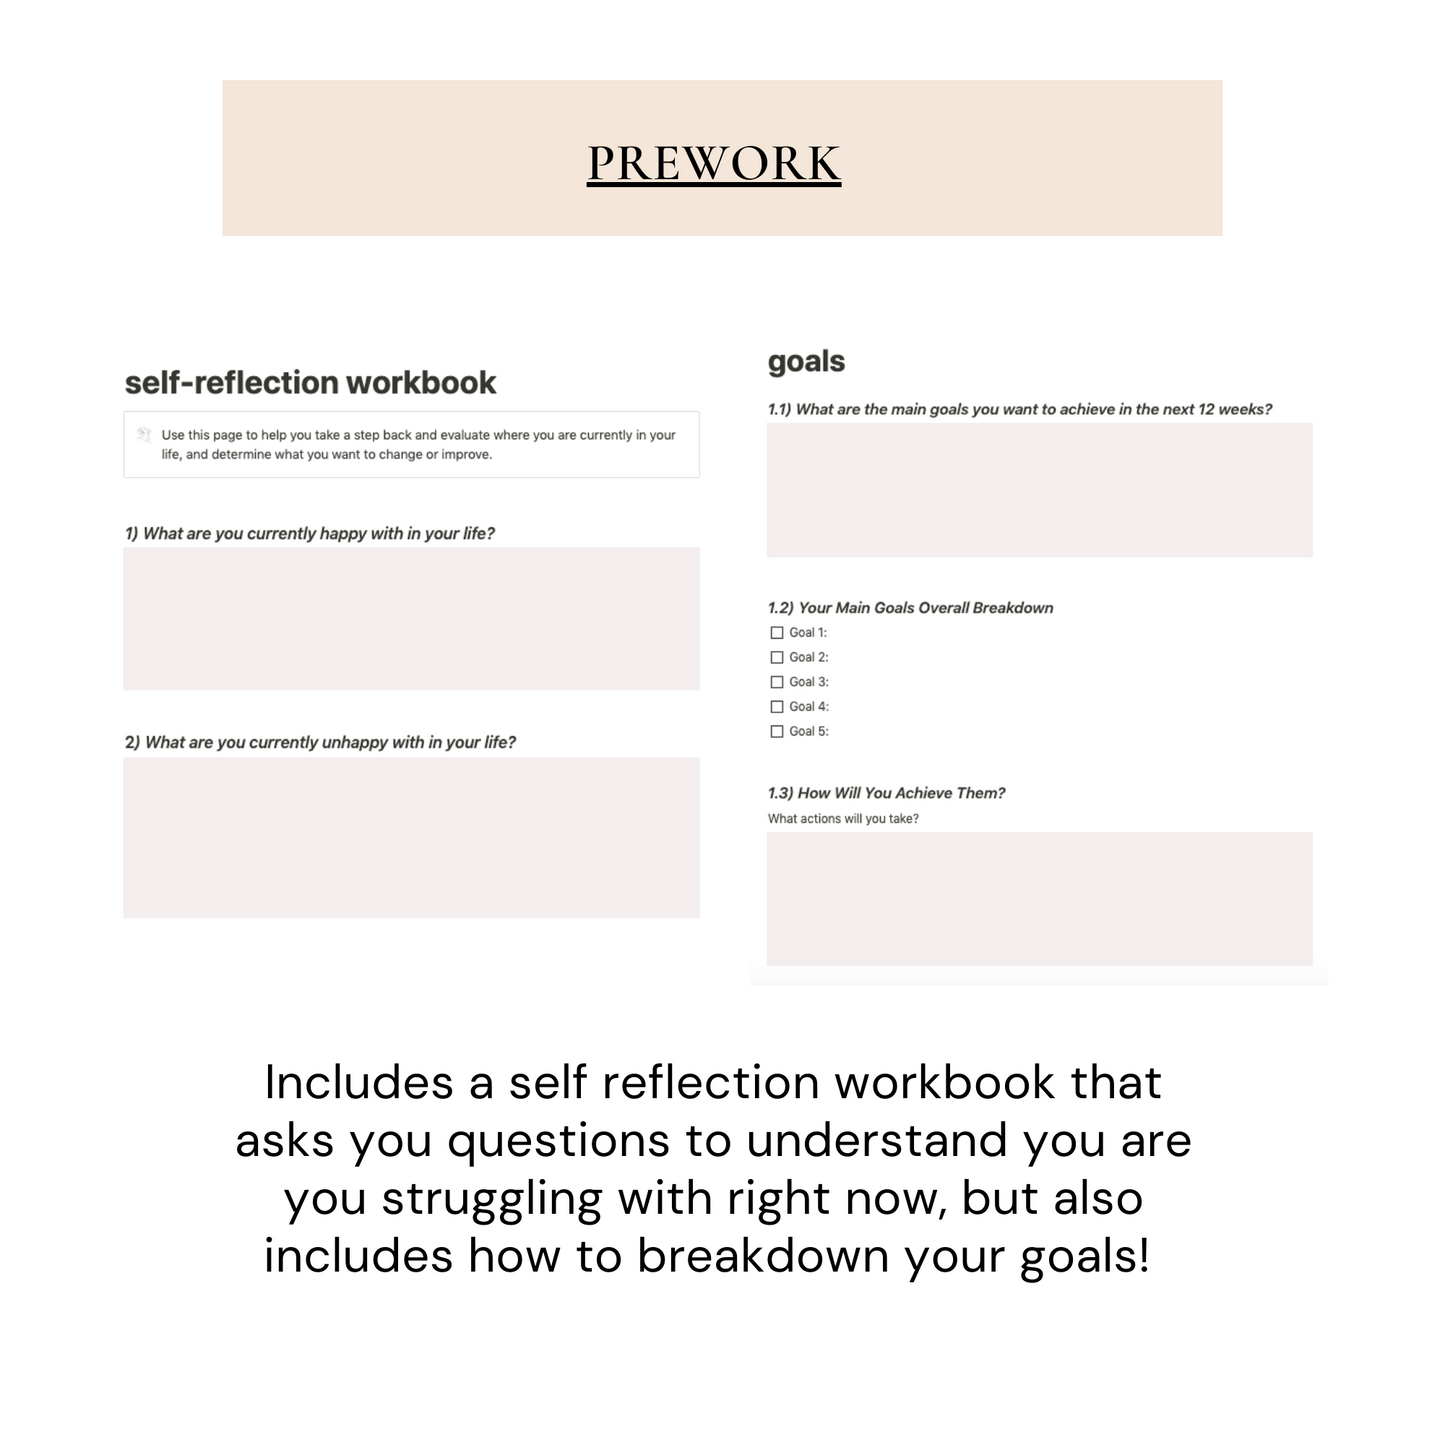 Glow Up Notion Templates | Biege - Wellness By Her Shop